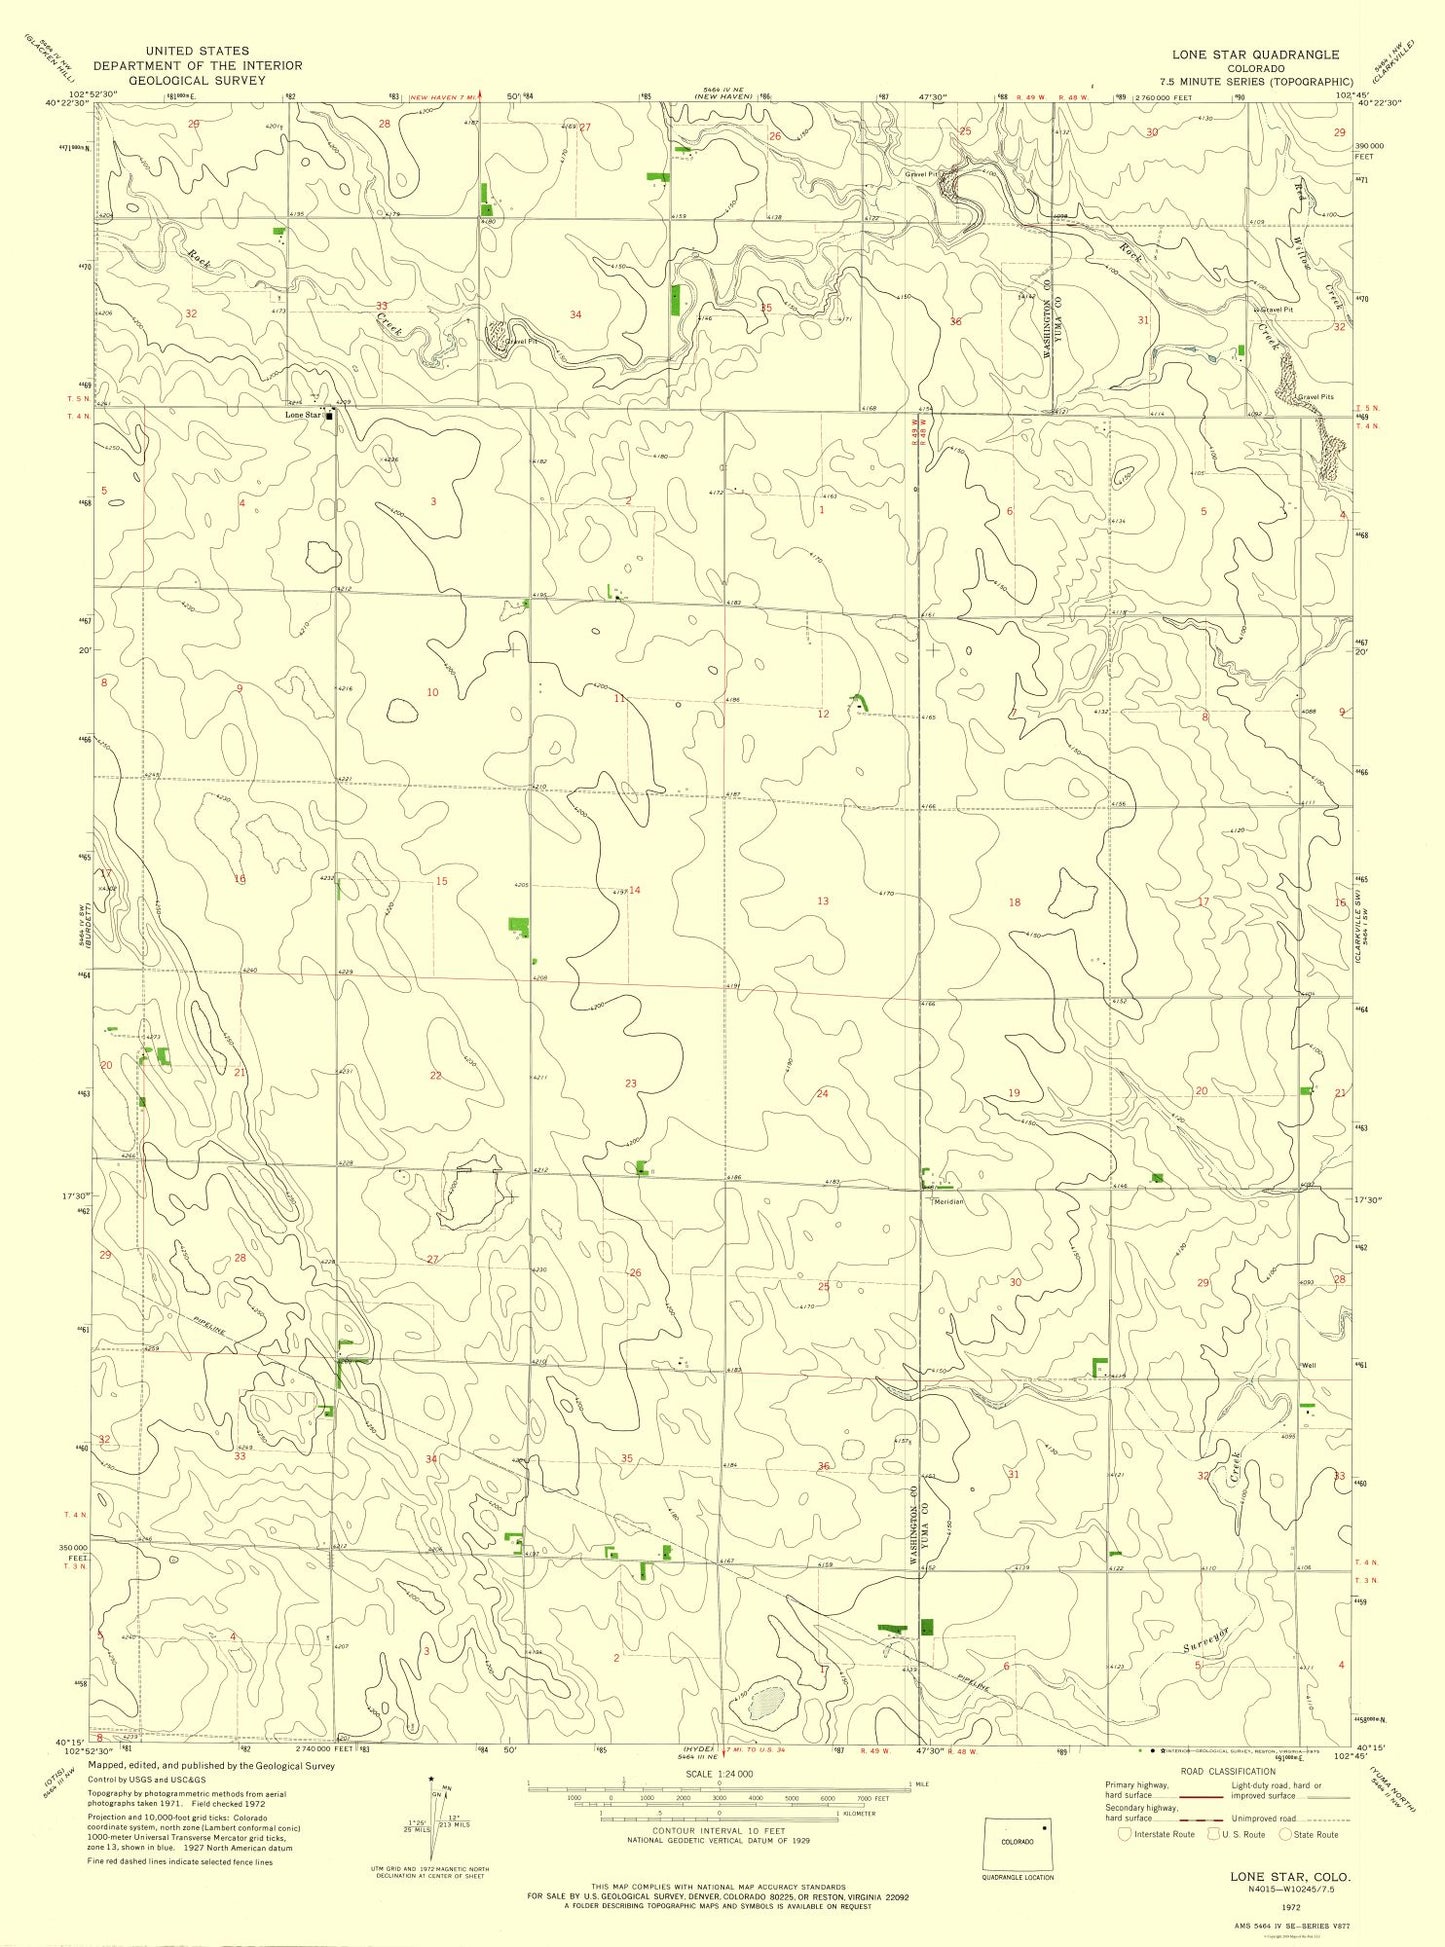 Topographical Map - Lone Star Colorado Quad - USGS 1972 - 23 x 31.01 - Vintage Wall Art